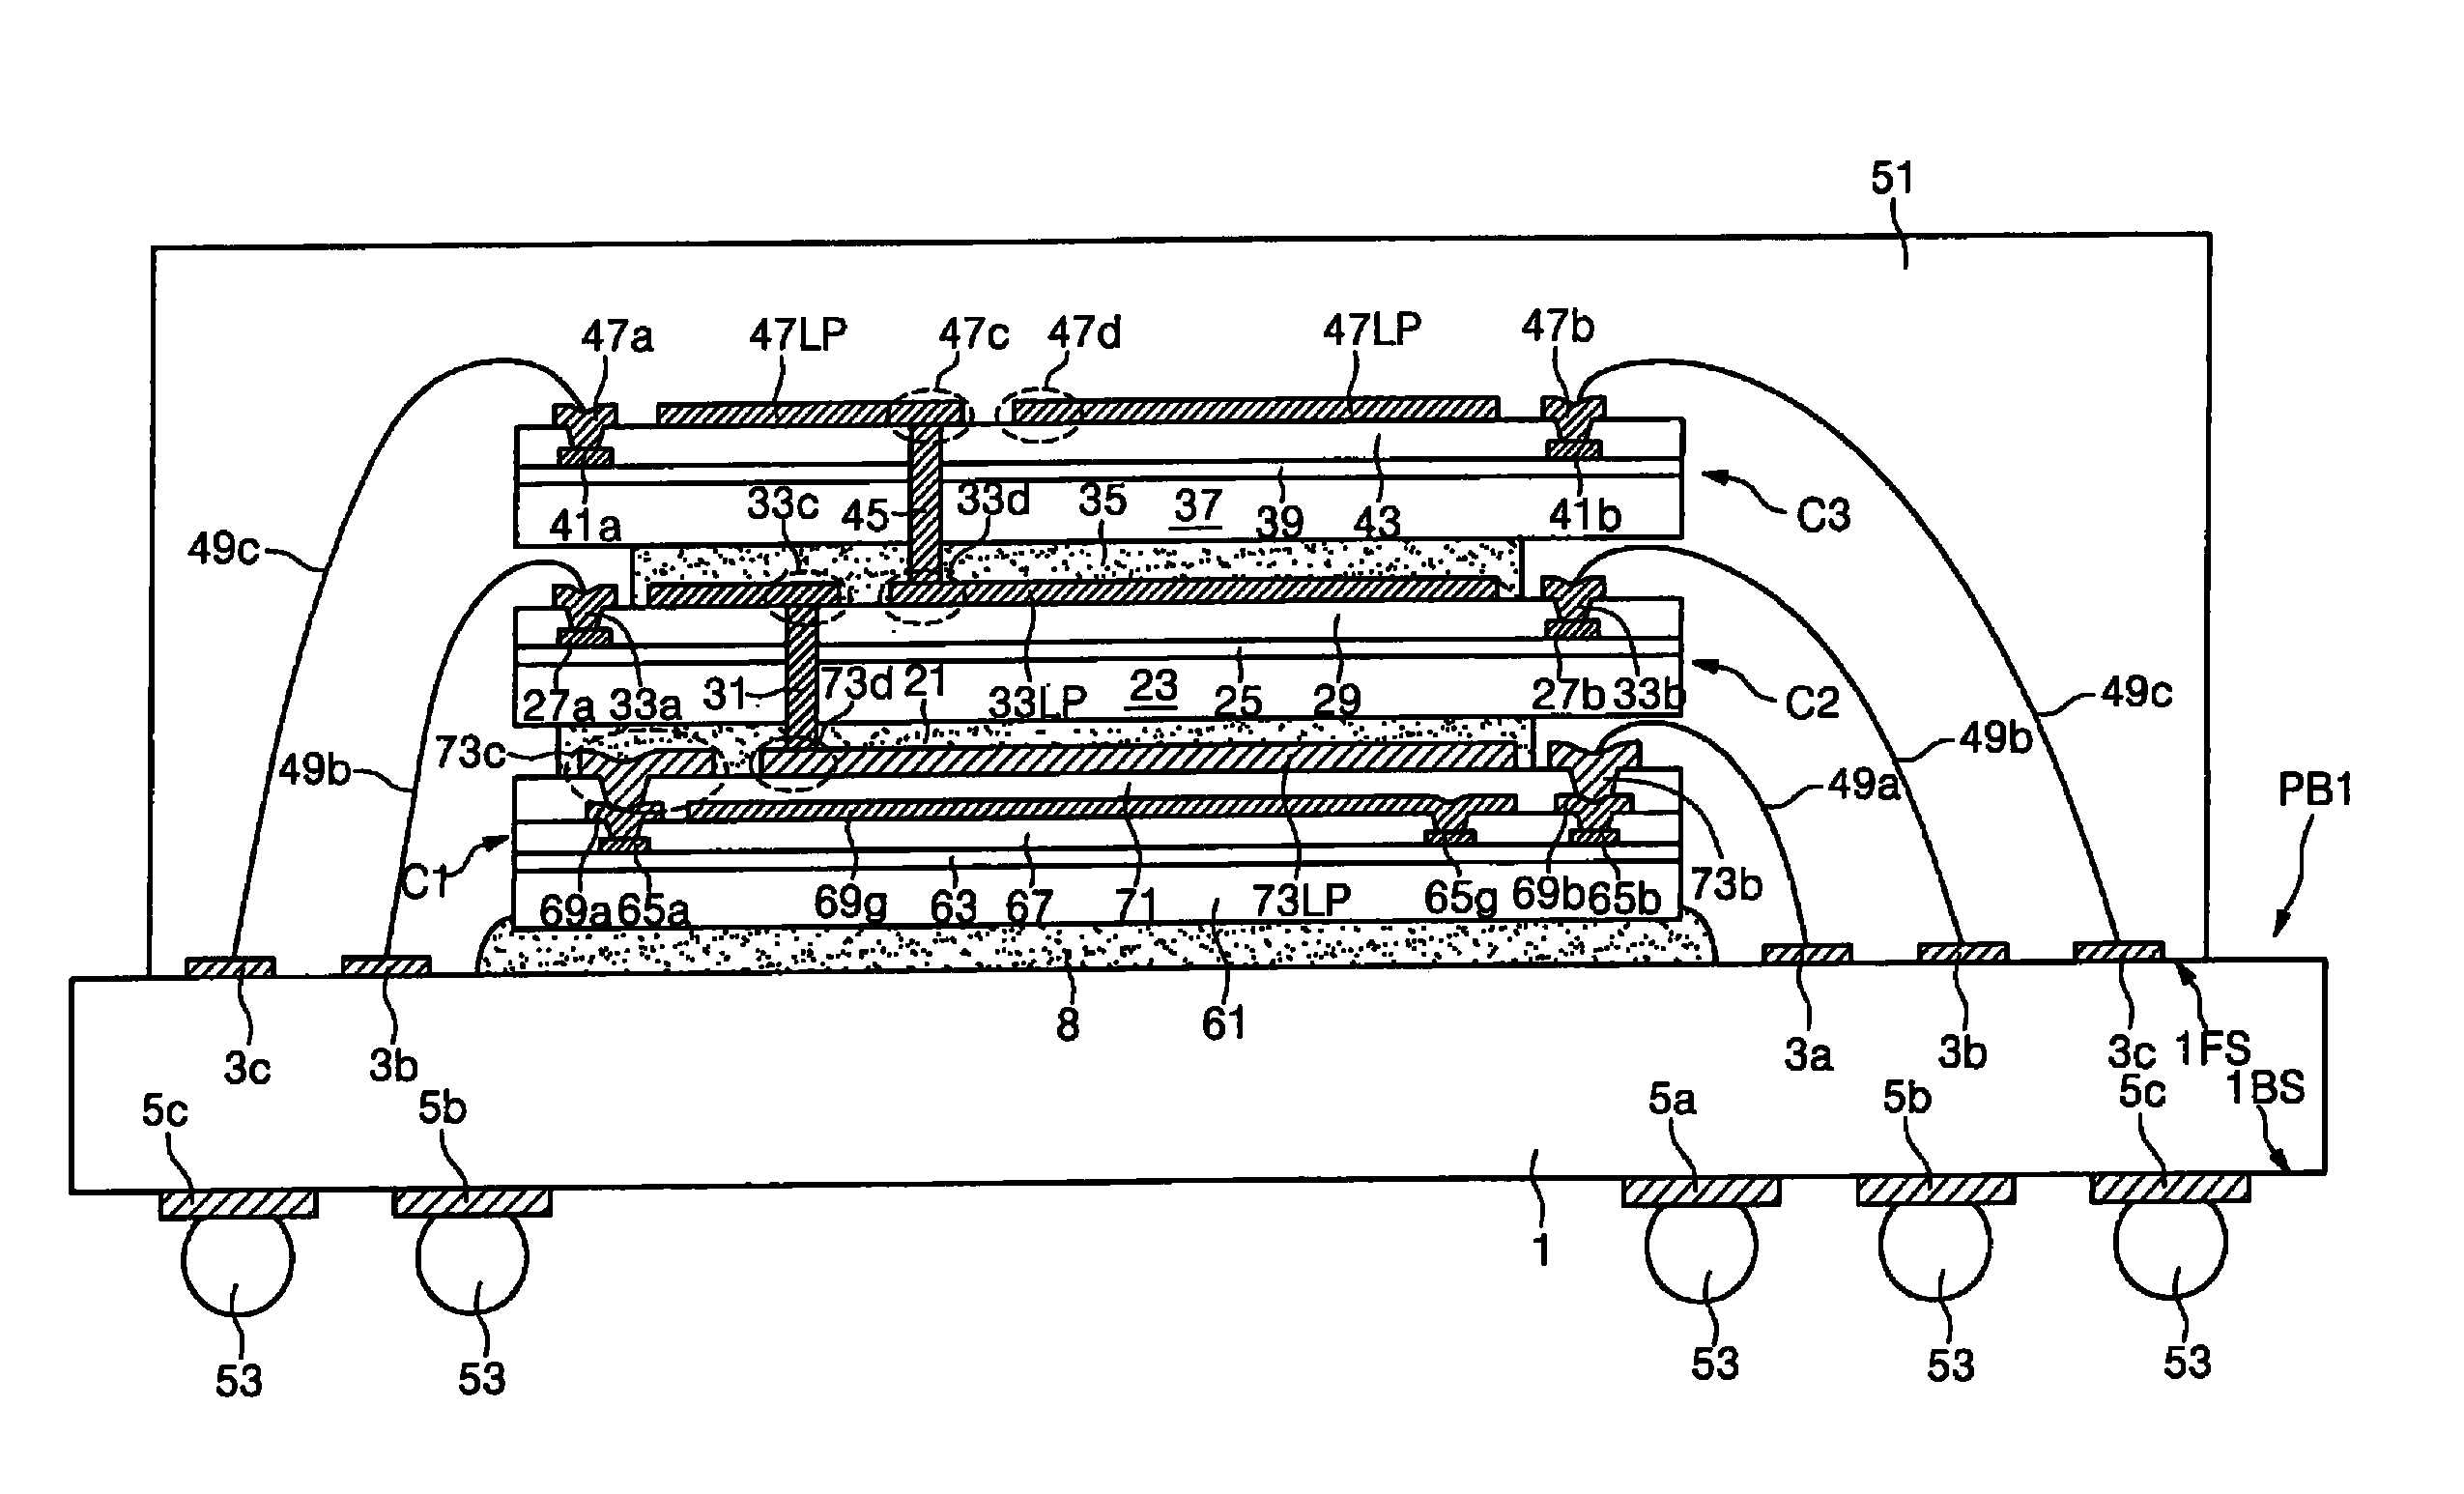 Semiconductor package including transformer or antenna